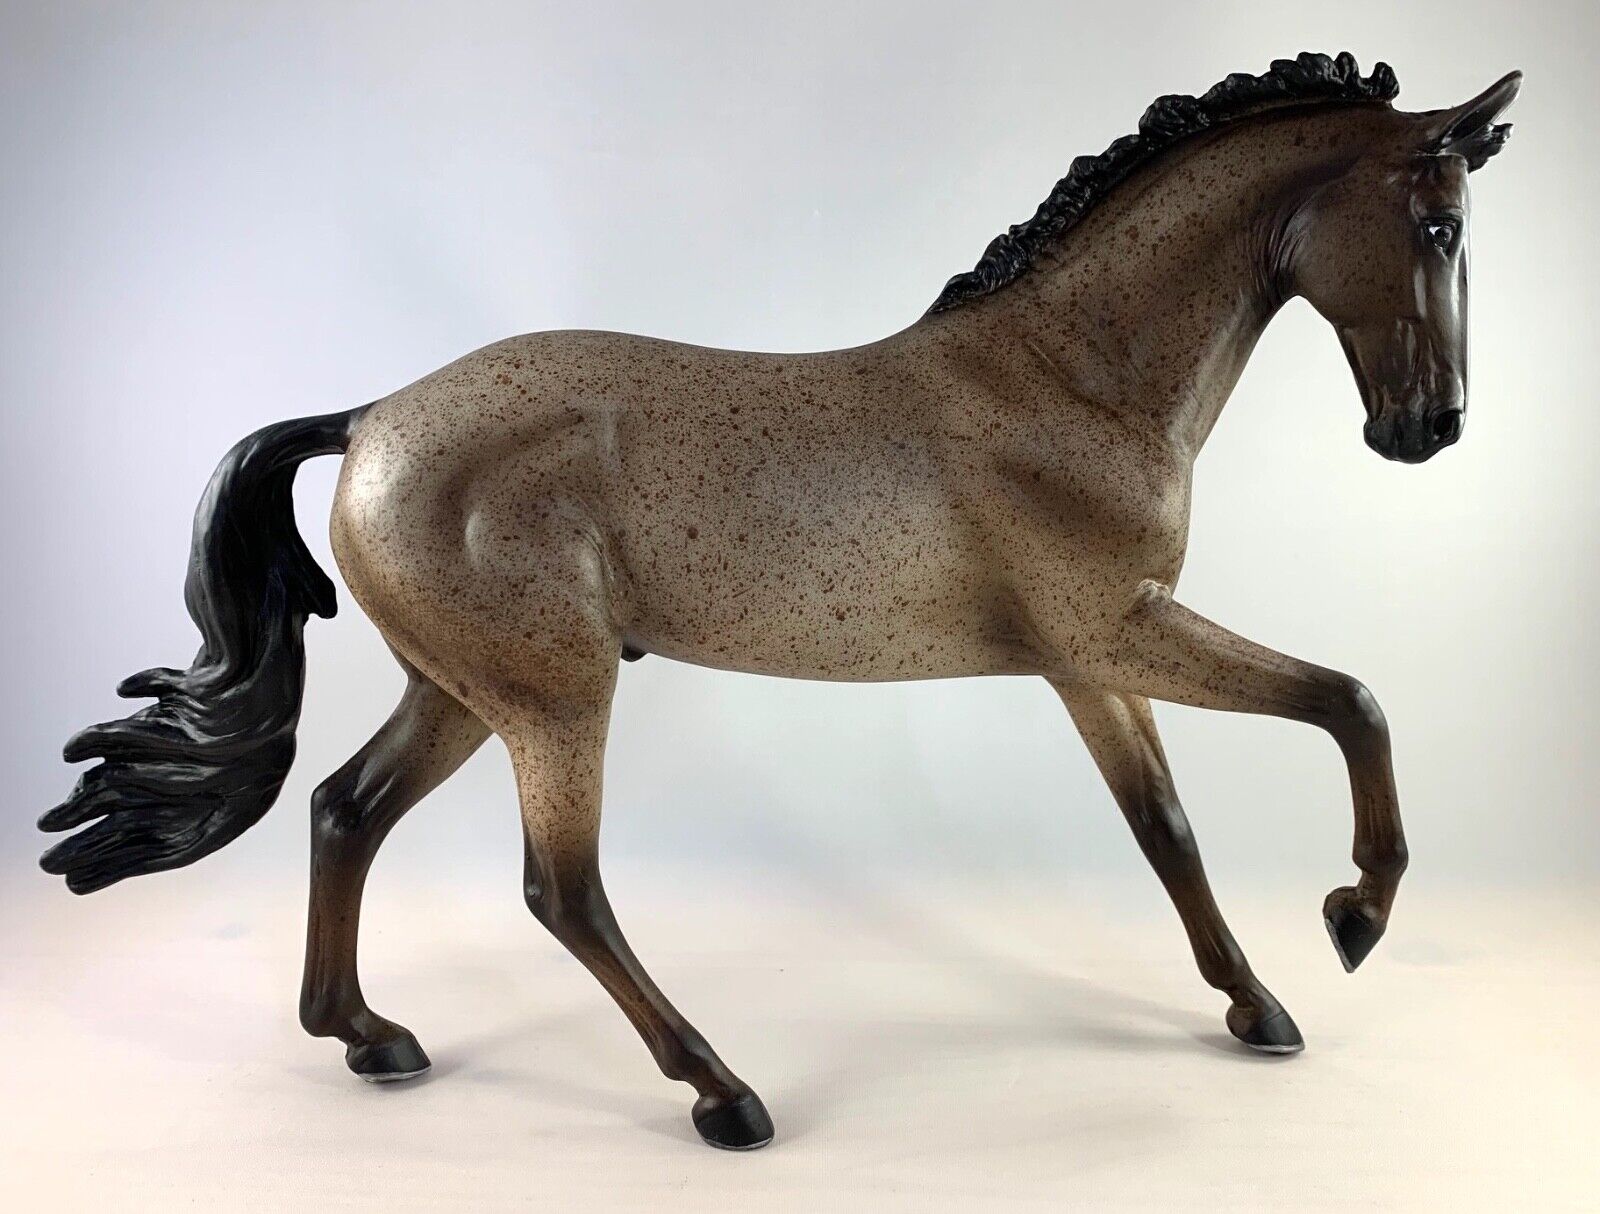 Customized Breyer model horse, Cantering Warmblood Painted to a Roan